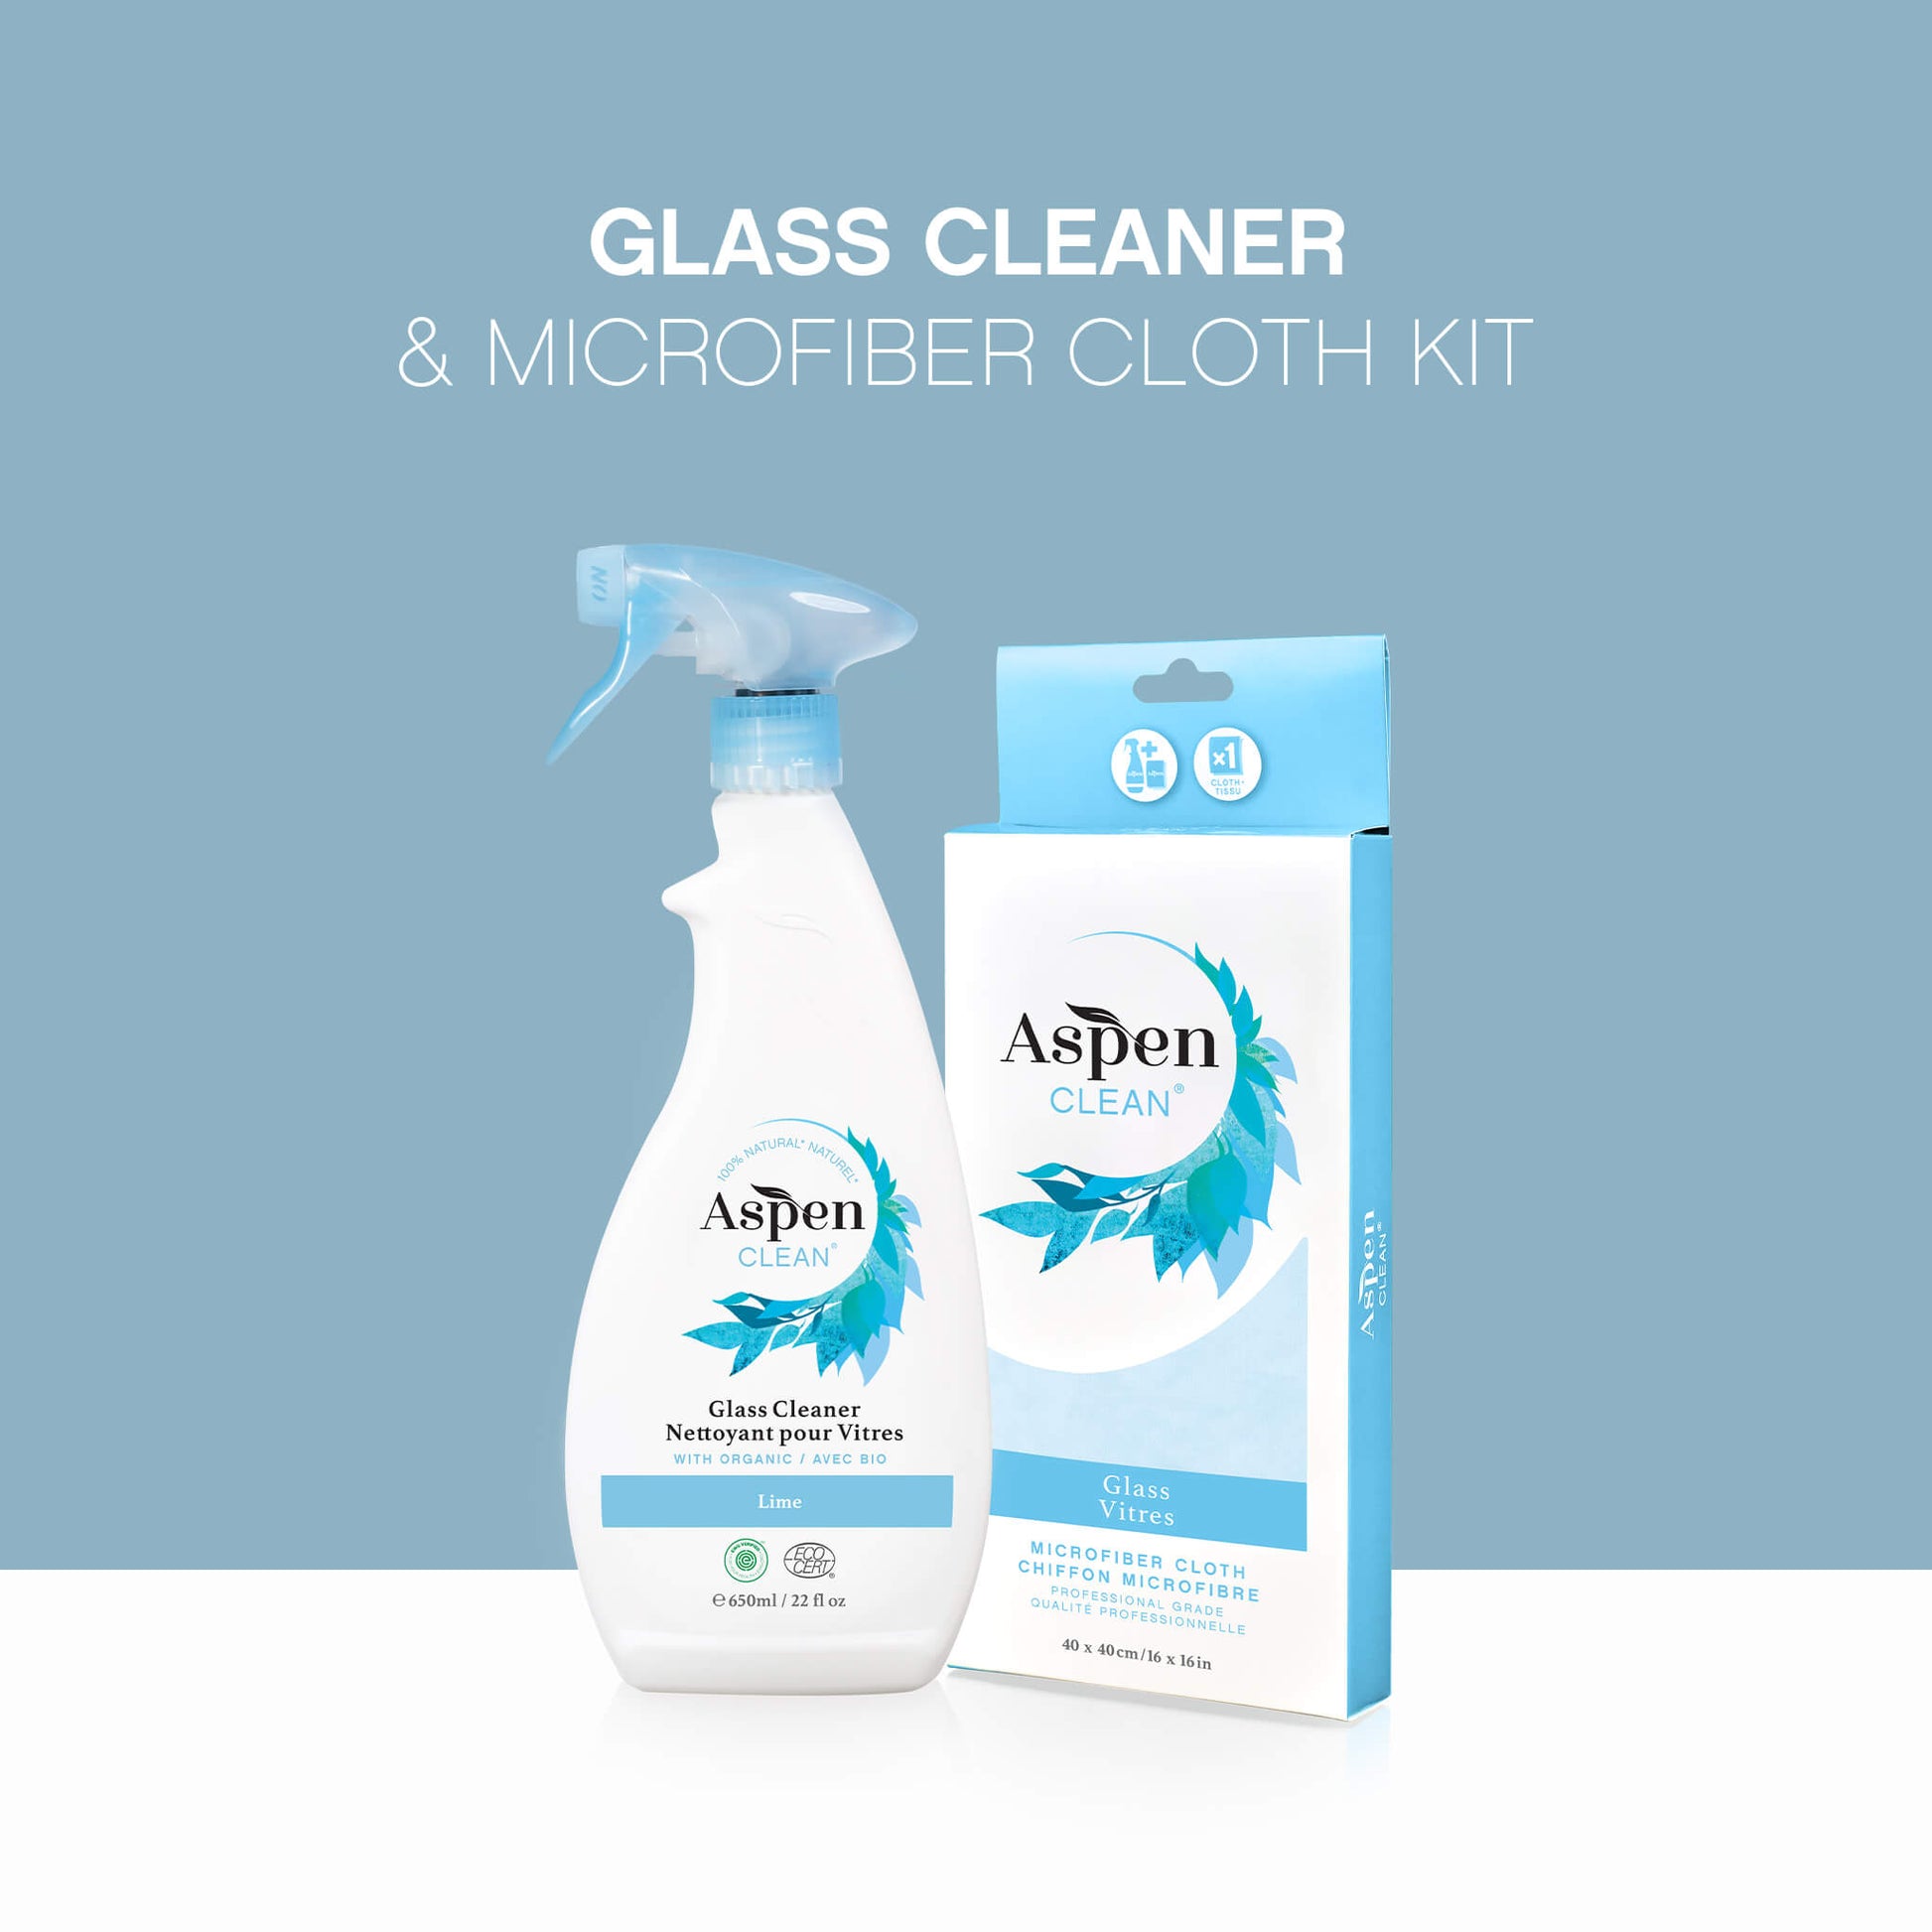 Glass Cleaner and Microfiber Cloth Kit